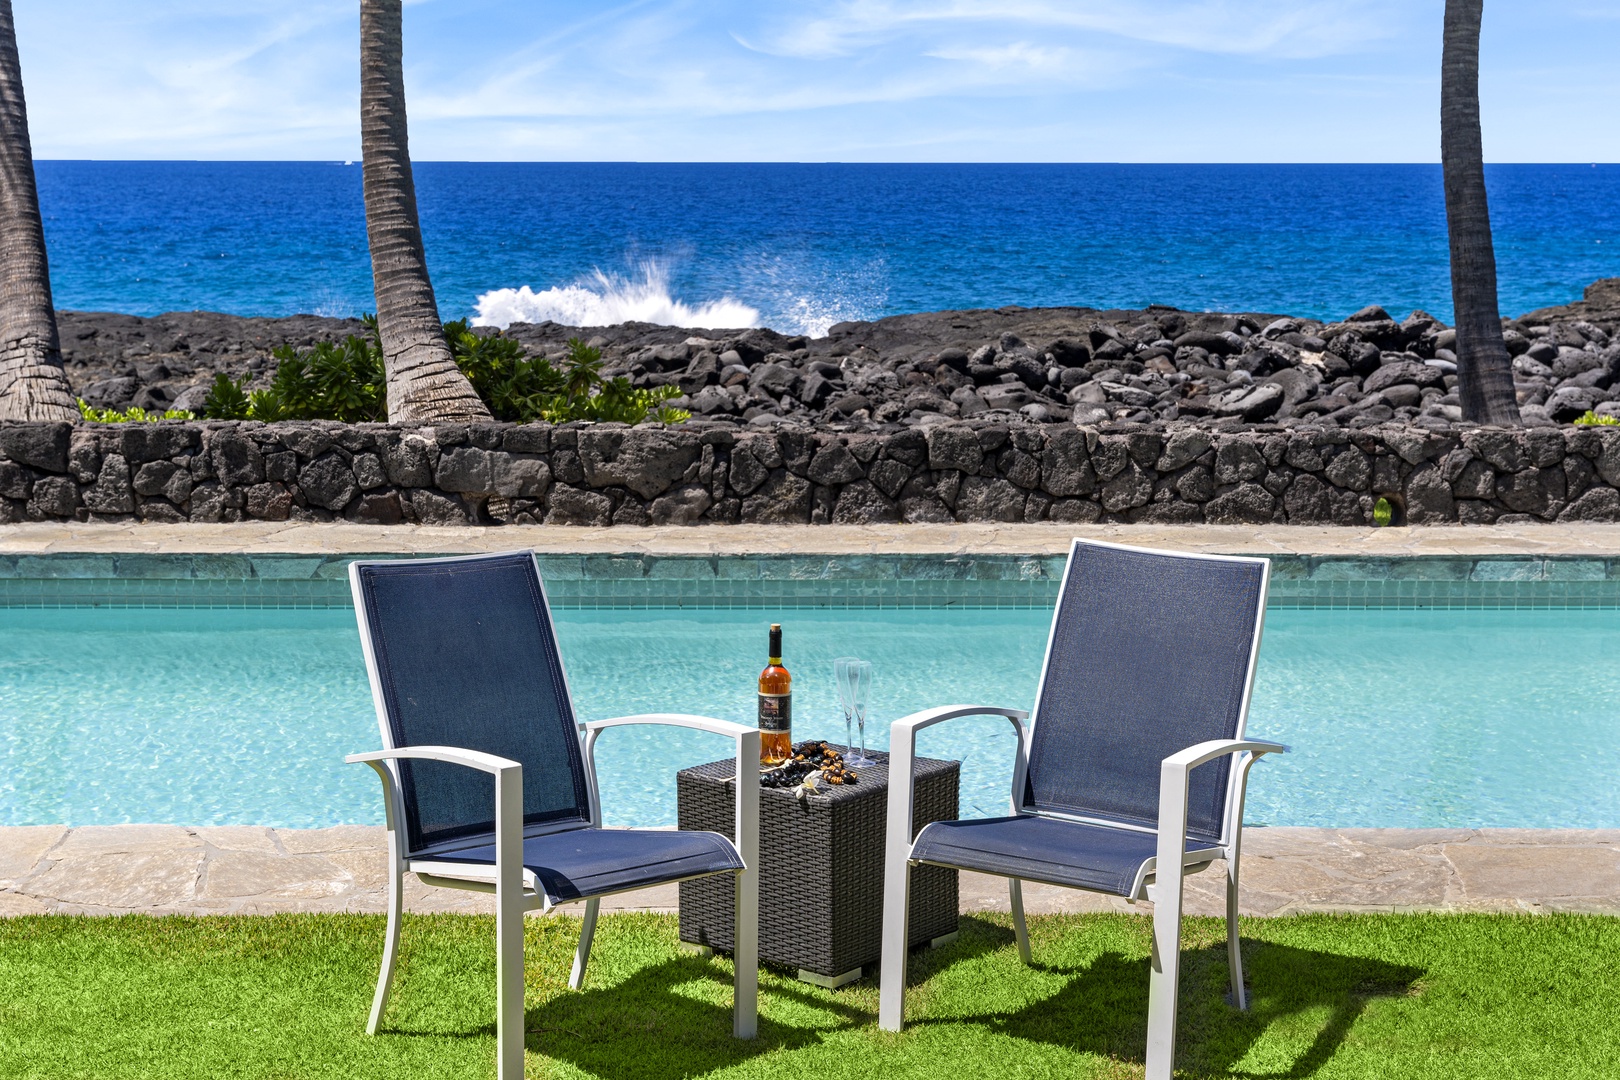 Kailua Kona Vacation Rentals, Kona Blue - Sit and enjoy the waves crashing on the rocks in front of the home